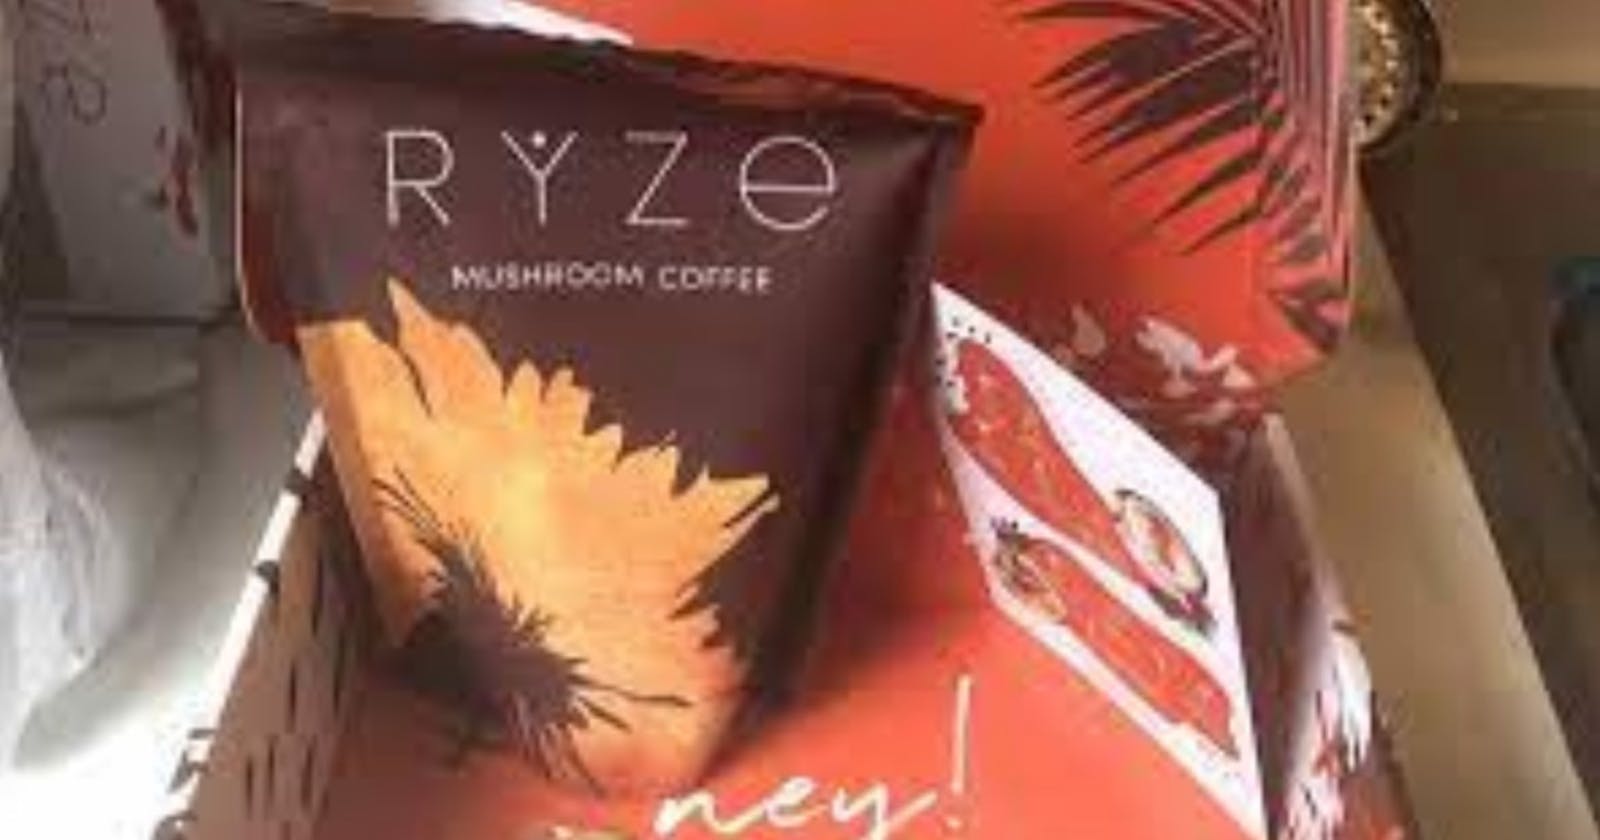 Ryze Coffee Reviews: Legit or Scam? (Full Details + Rating)